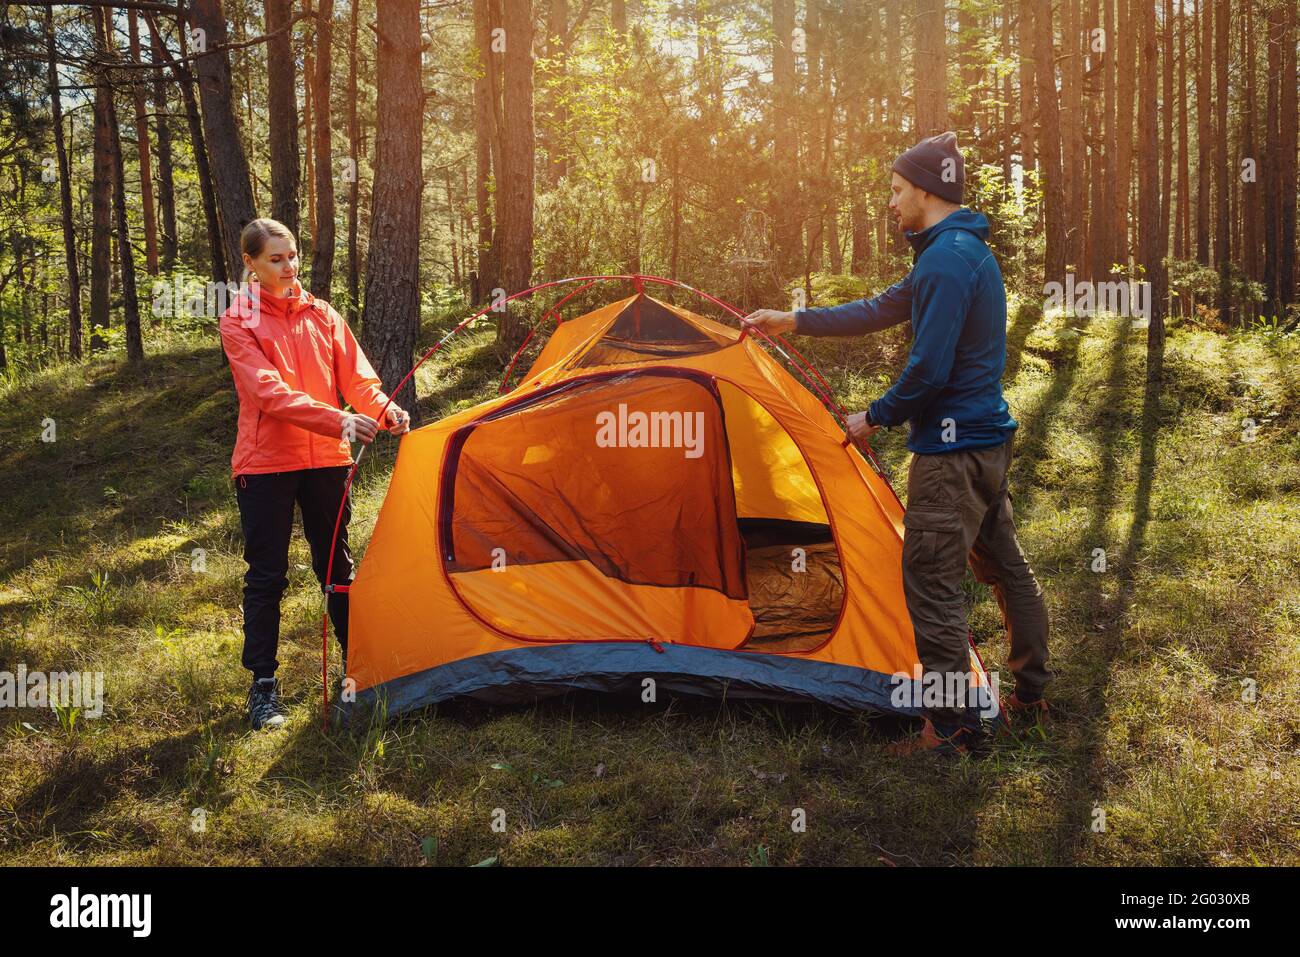 young couple set up a tent together in forest. outdoor adventure, camping trip Stock Photo